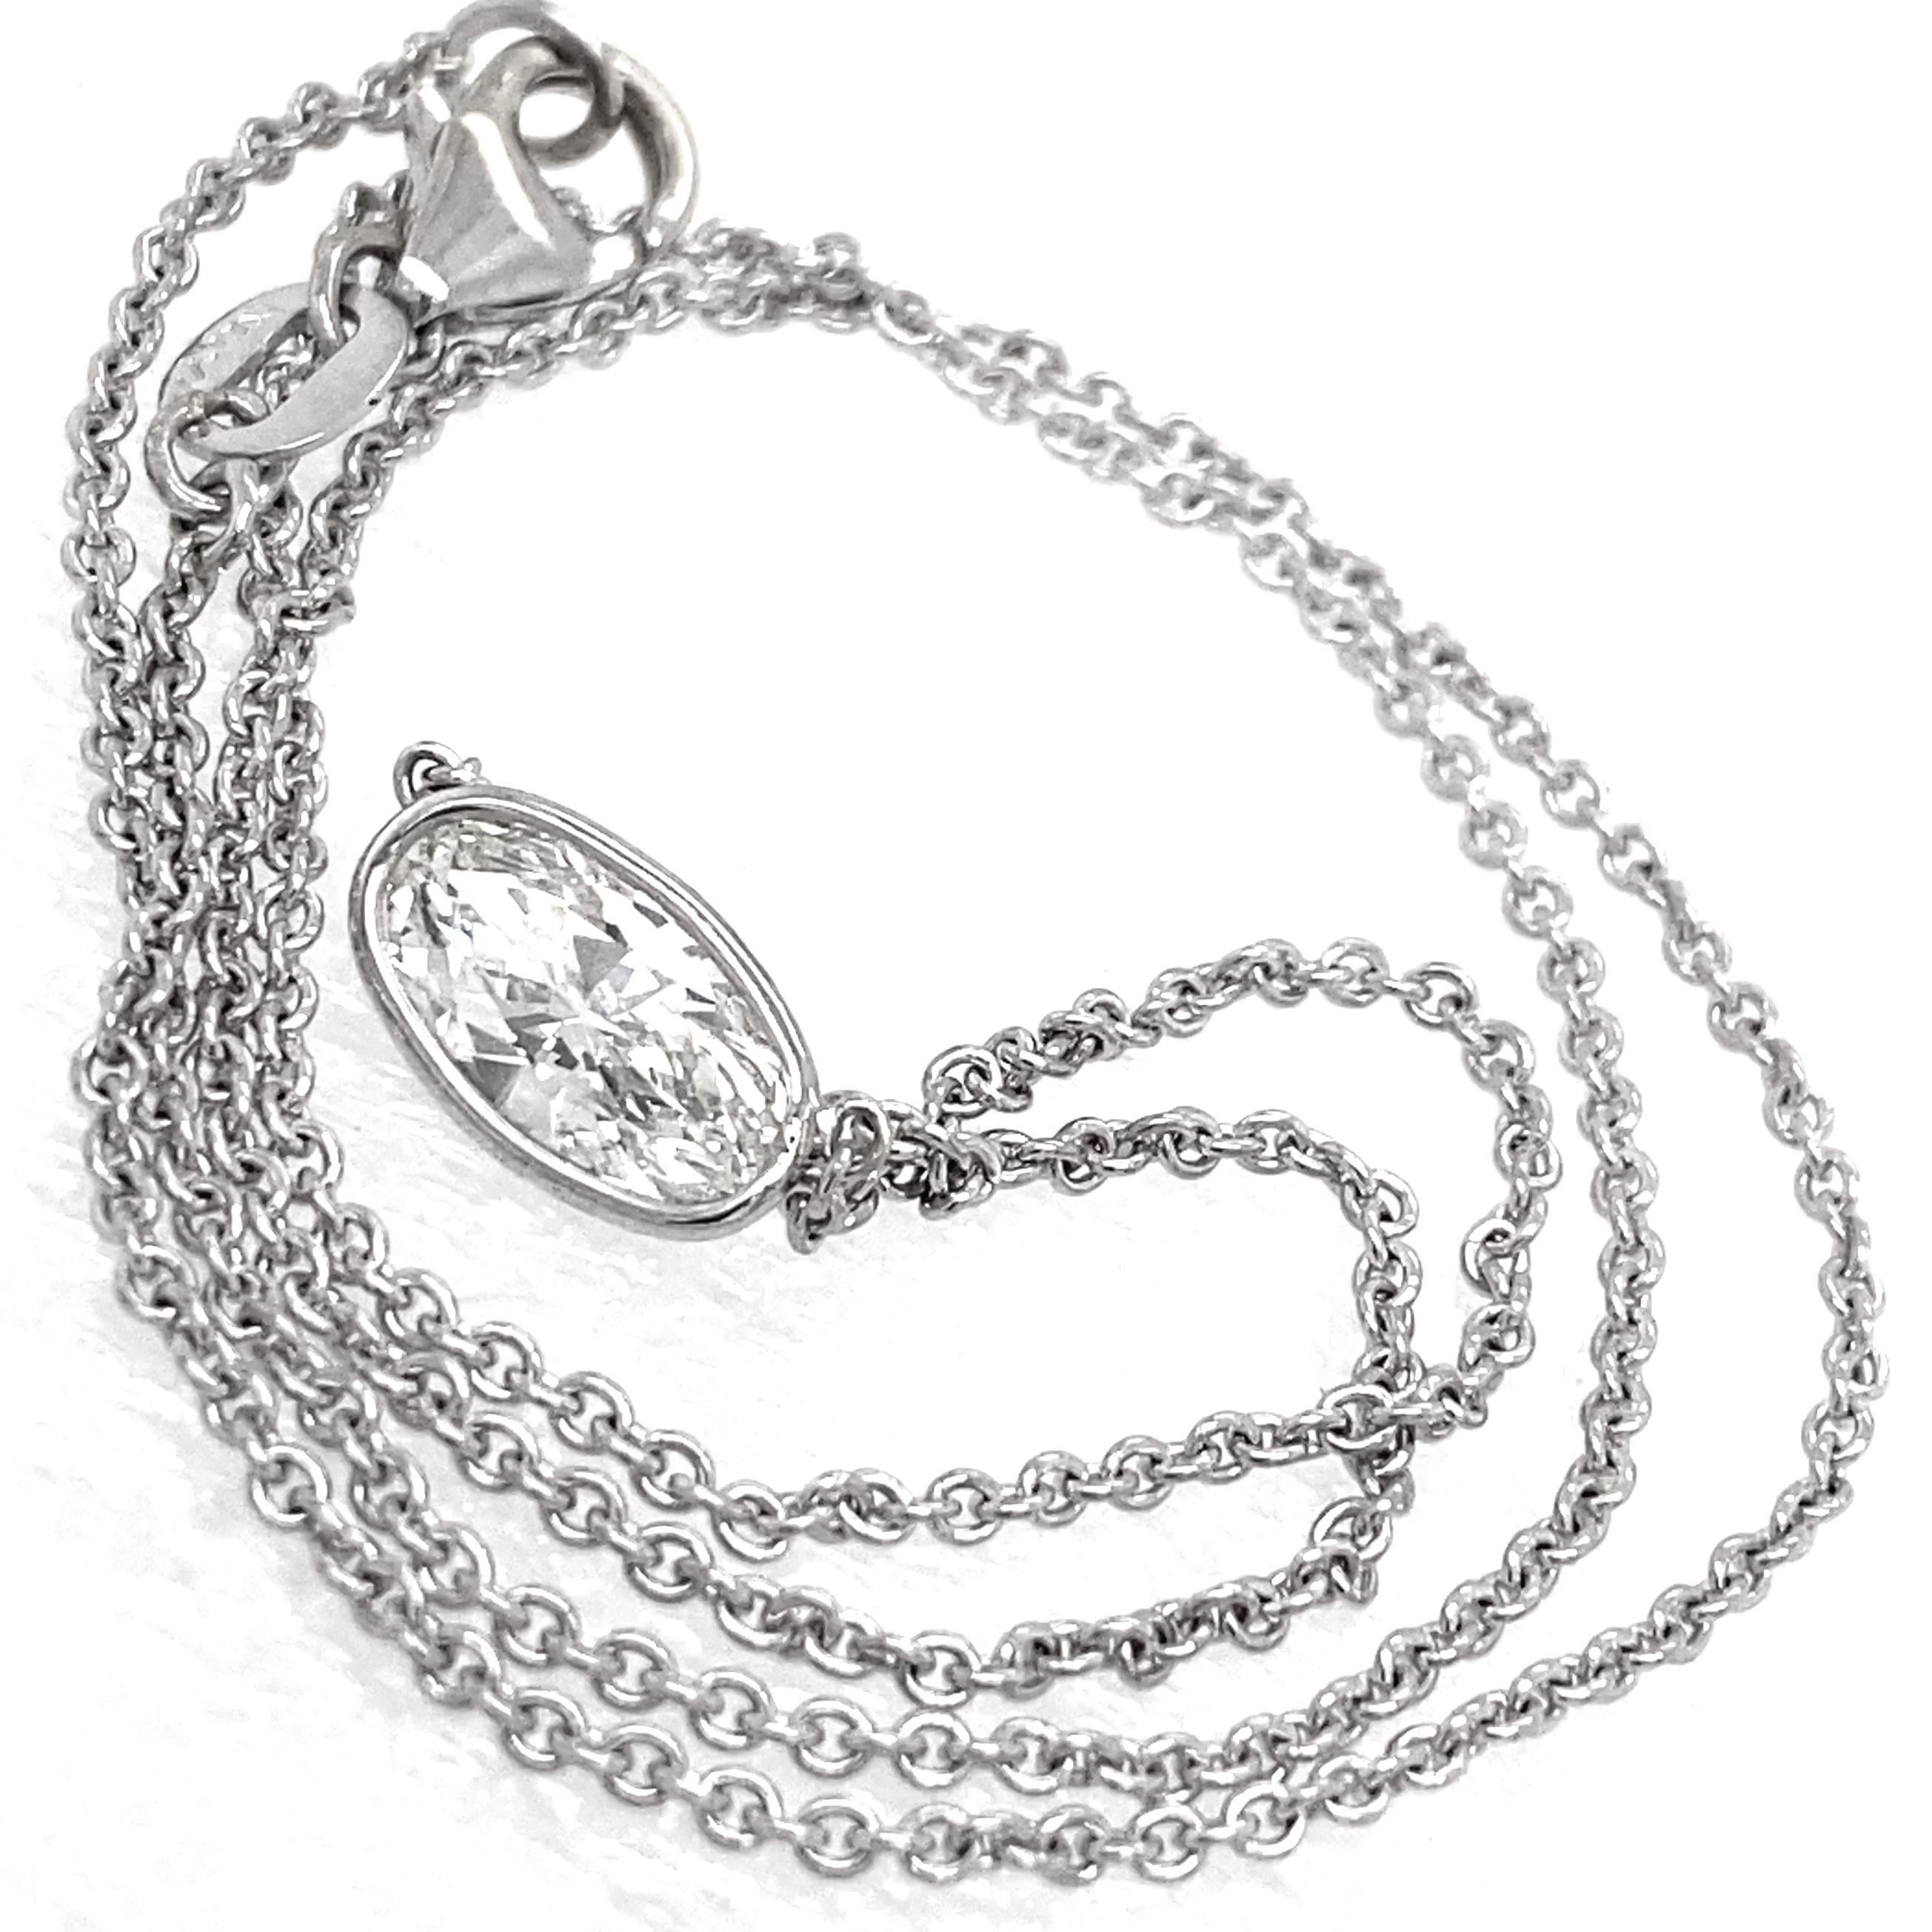 This necklace features a diamond we've had in the shop for a while, but it never really found the right ring setting, being a bit on the  skinny side.  The Boss finally decided its elongated shape would look better on a neck than on a finger. 

The